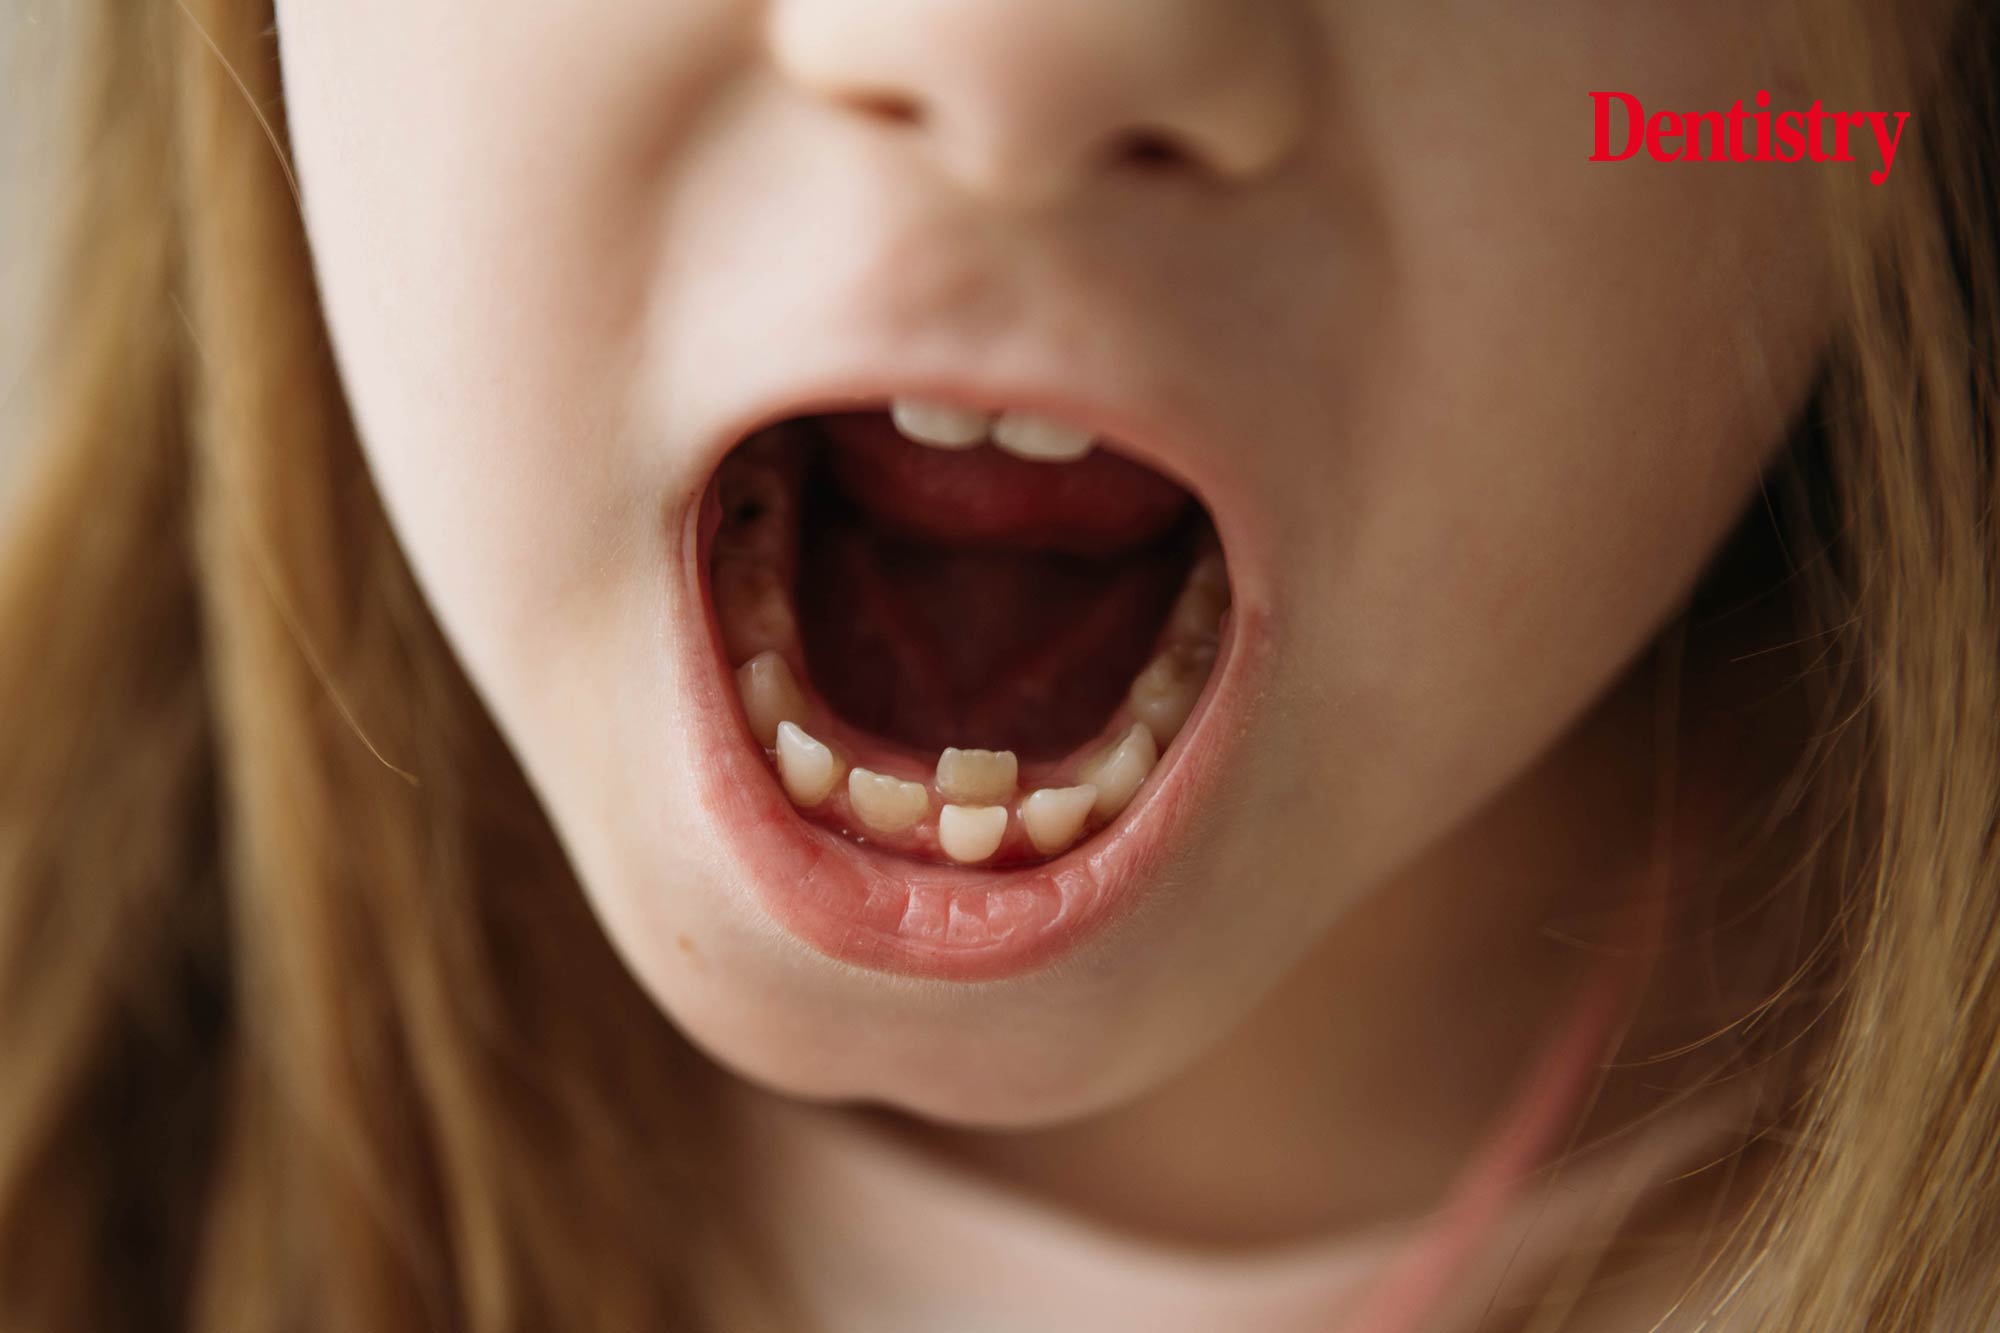 Growth lines in baby teeth track weight gain in adolescents